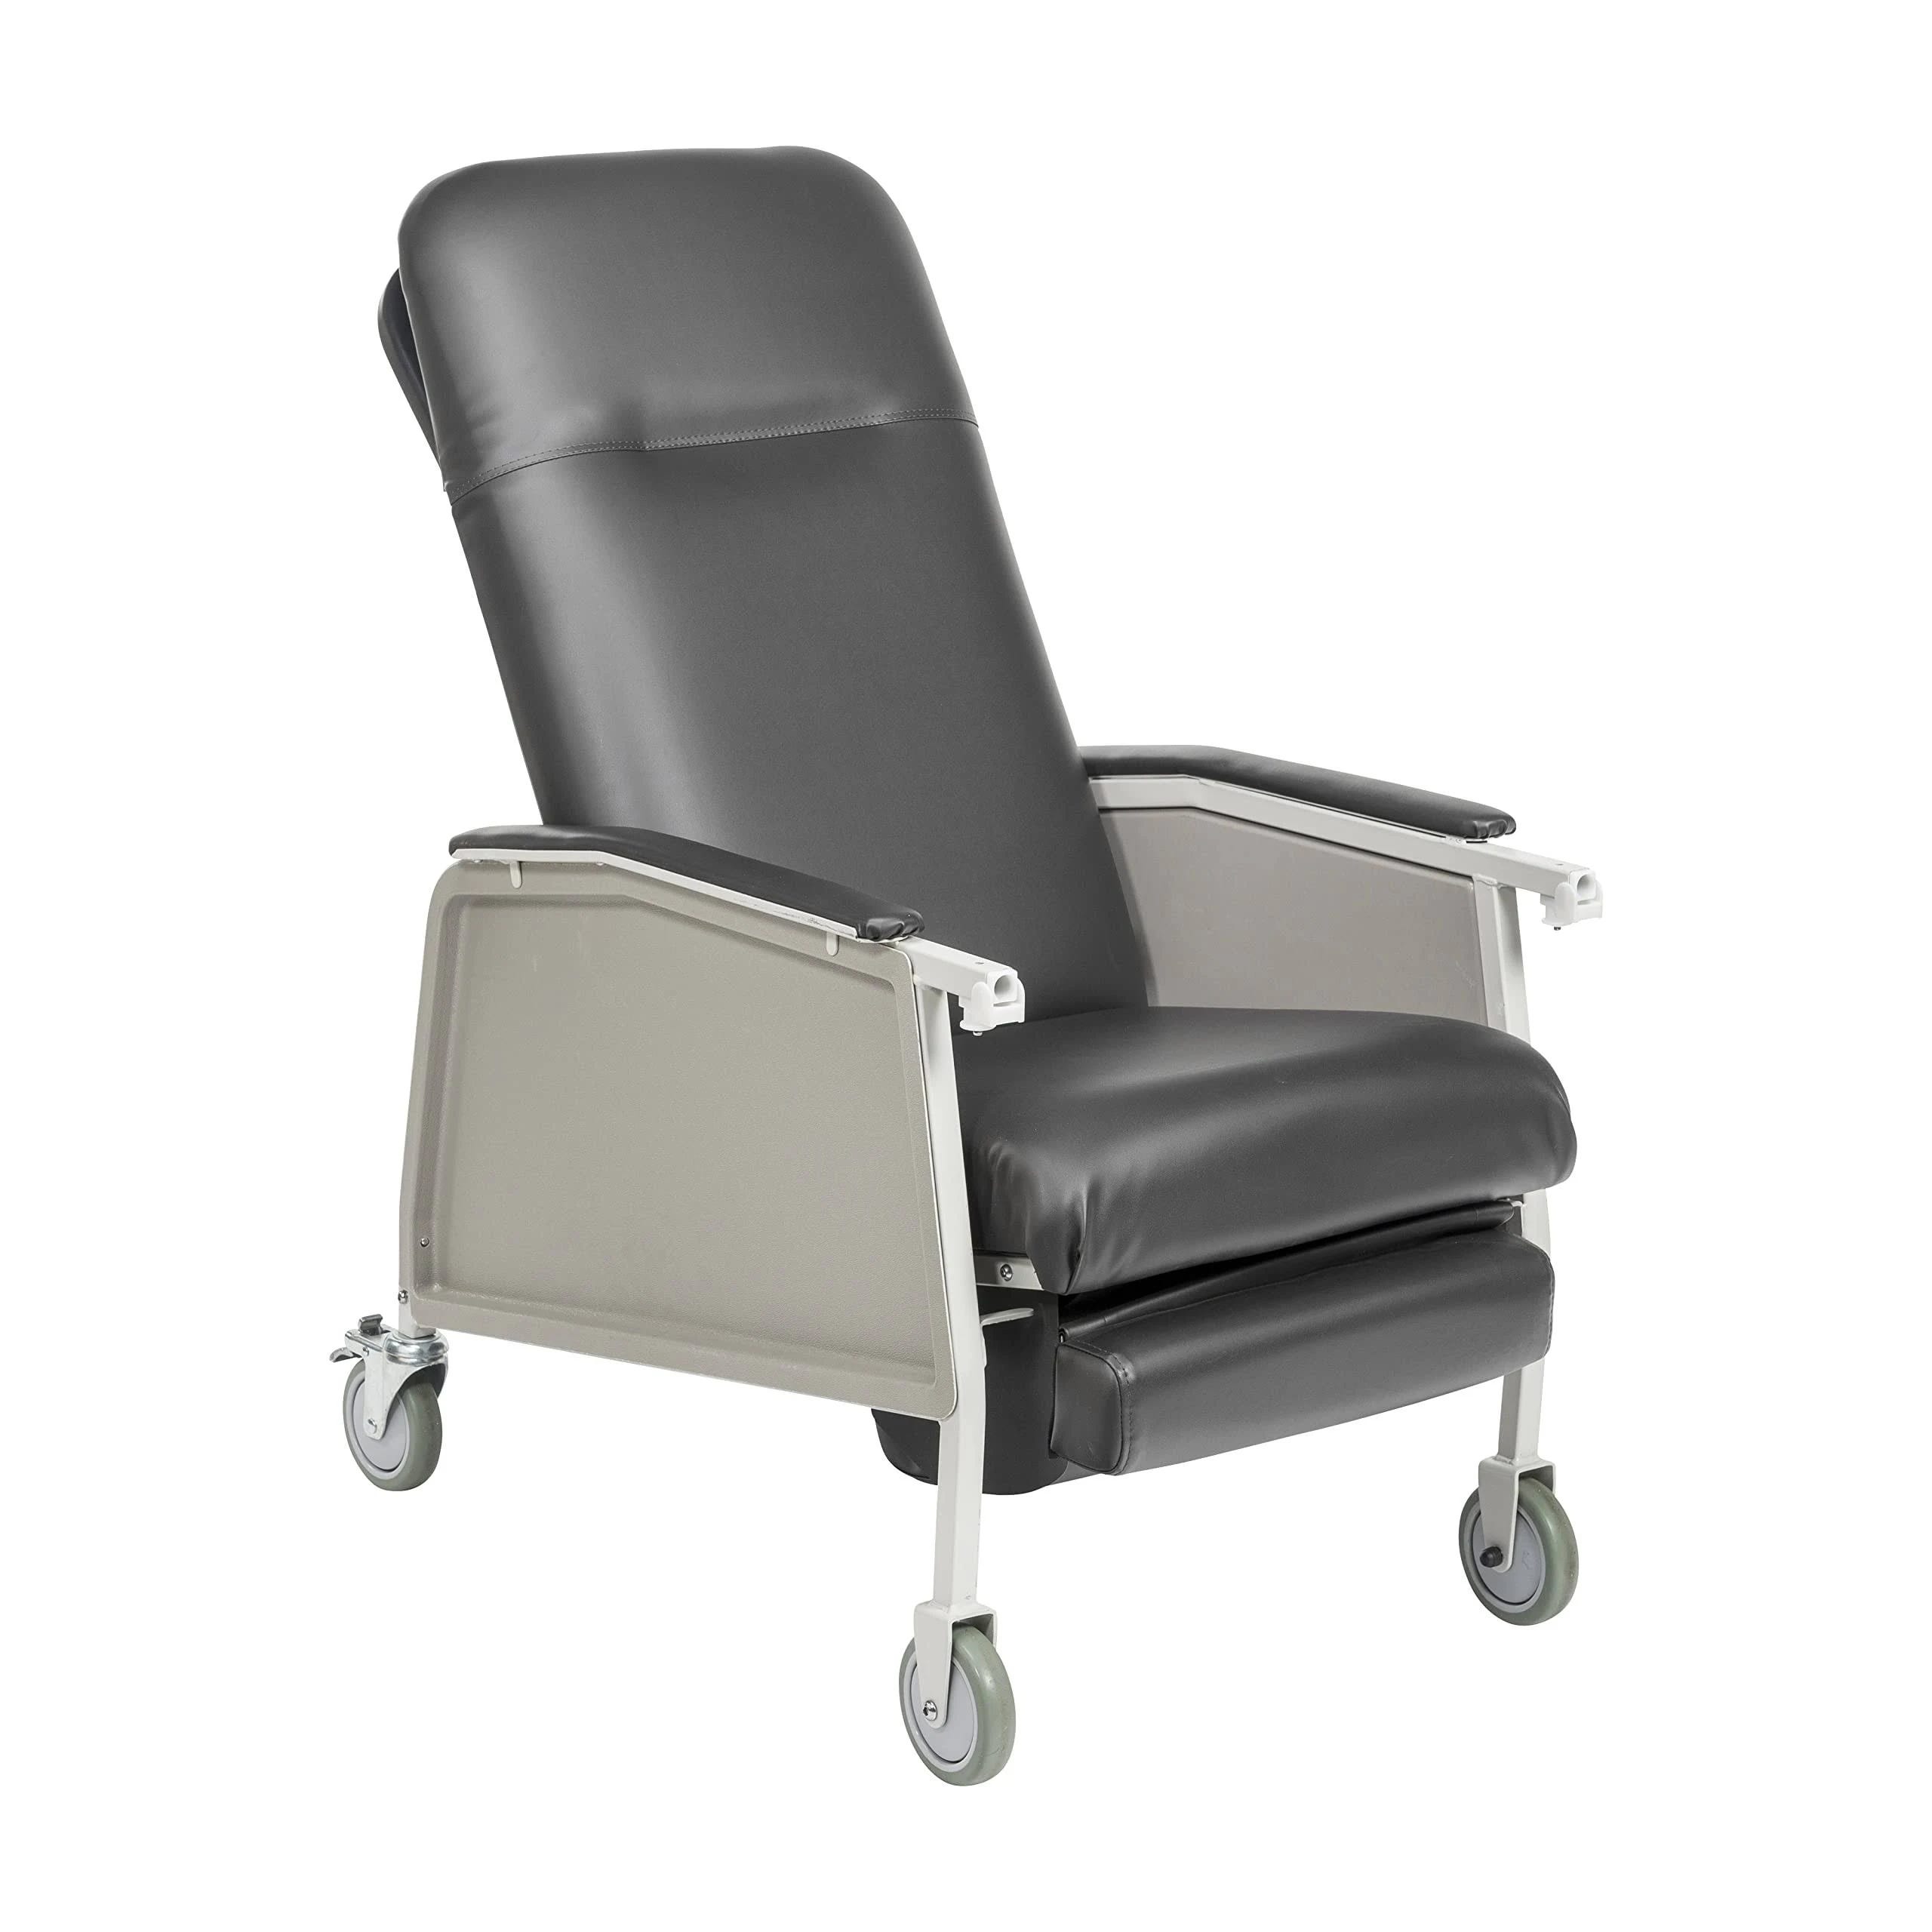 Comfortable 3-Position Geri Chair with Moisture Barrier and Built-In Headrest | Image